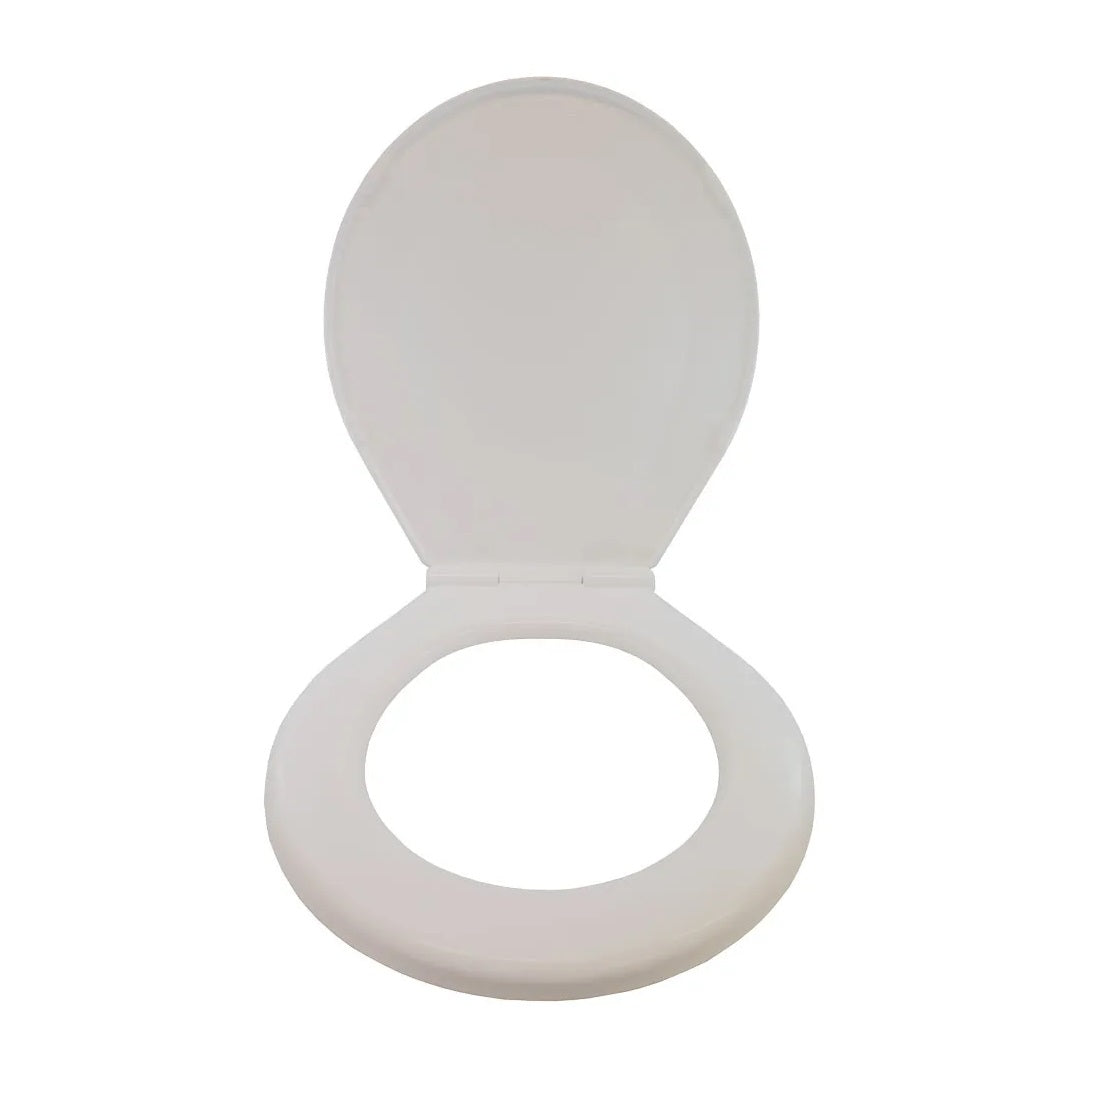 Delux Toilet Seat and Cover